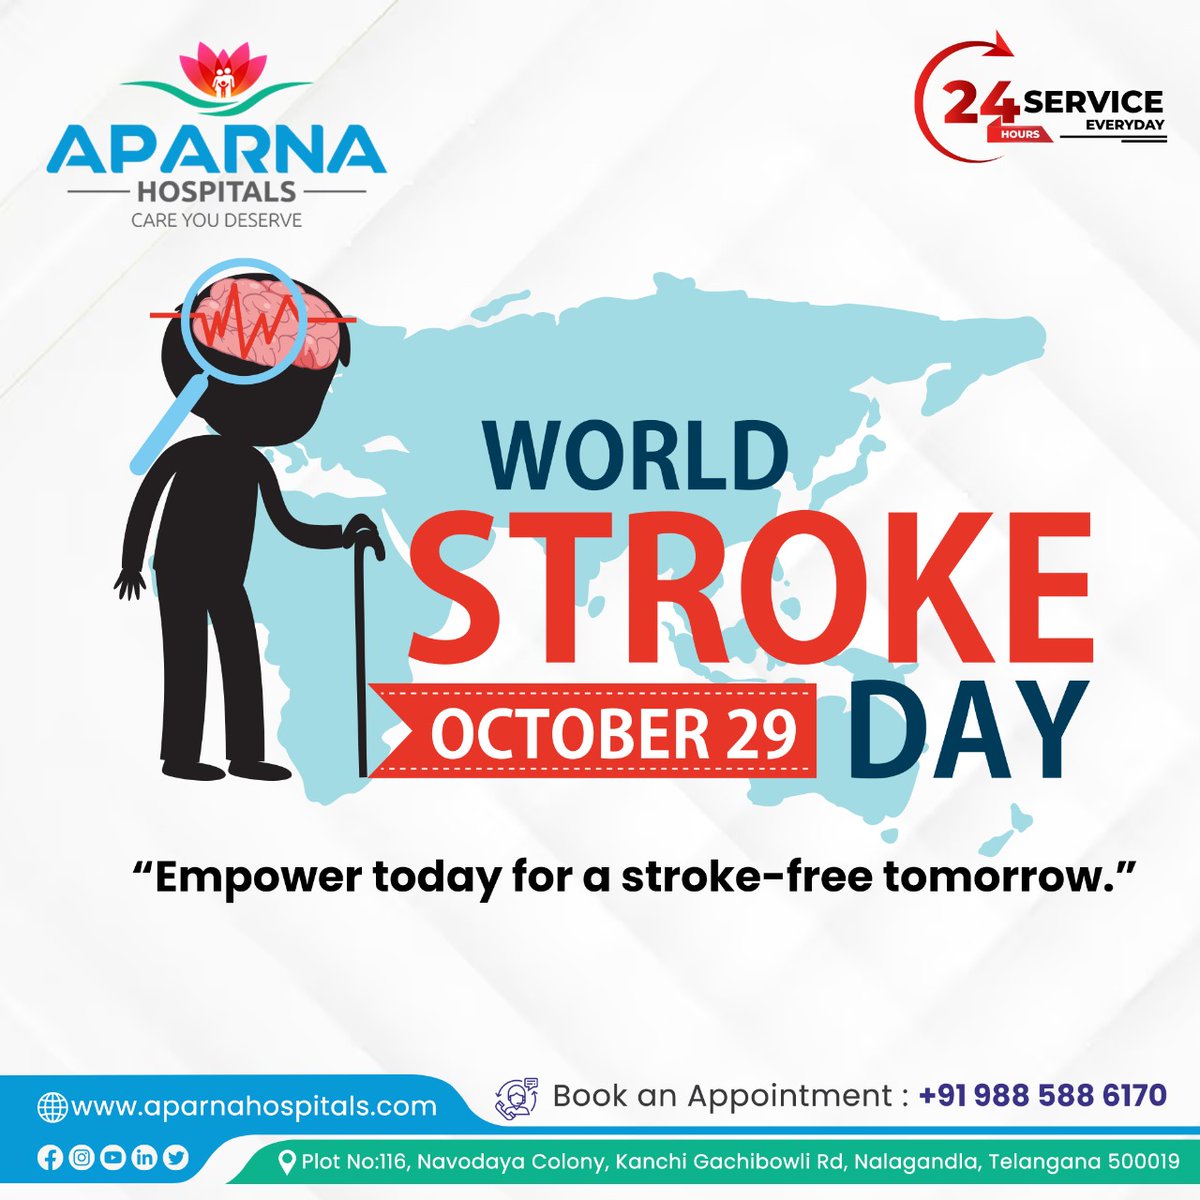 'On World Stroke Day, Aparna Hospital stands united in our commitment to stroke awareness and prevention. Your health is our priority, and together, we can make a difference. 💙

#WorldStrokeDay #worldstrokeday #worldstroke #stroke #strokeawareness #strokeprevention #heartstroke'